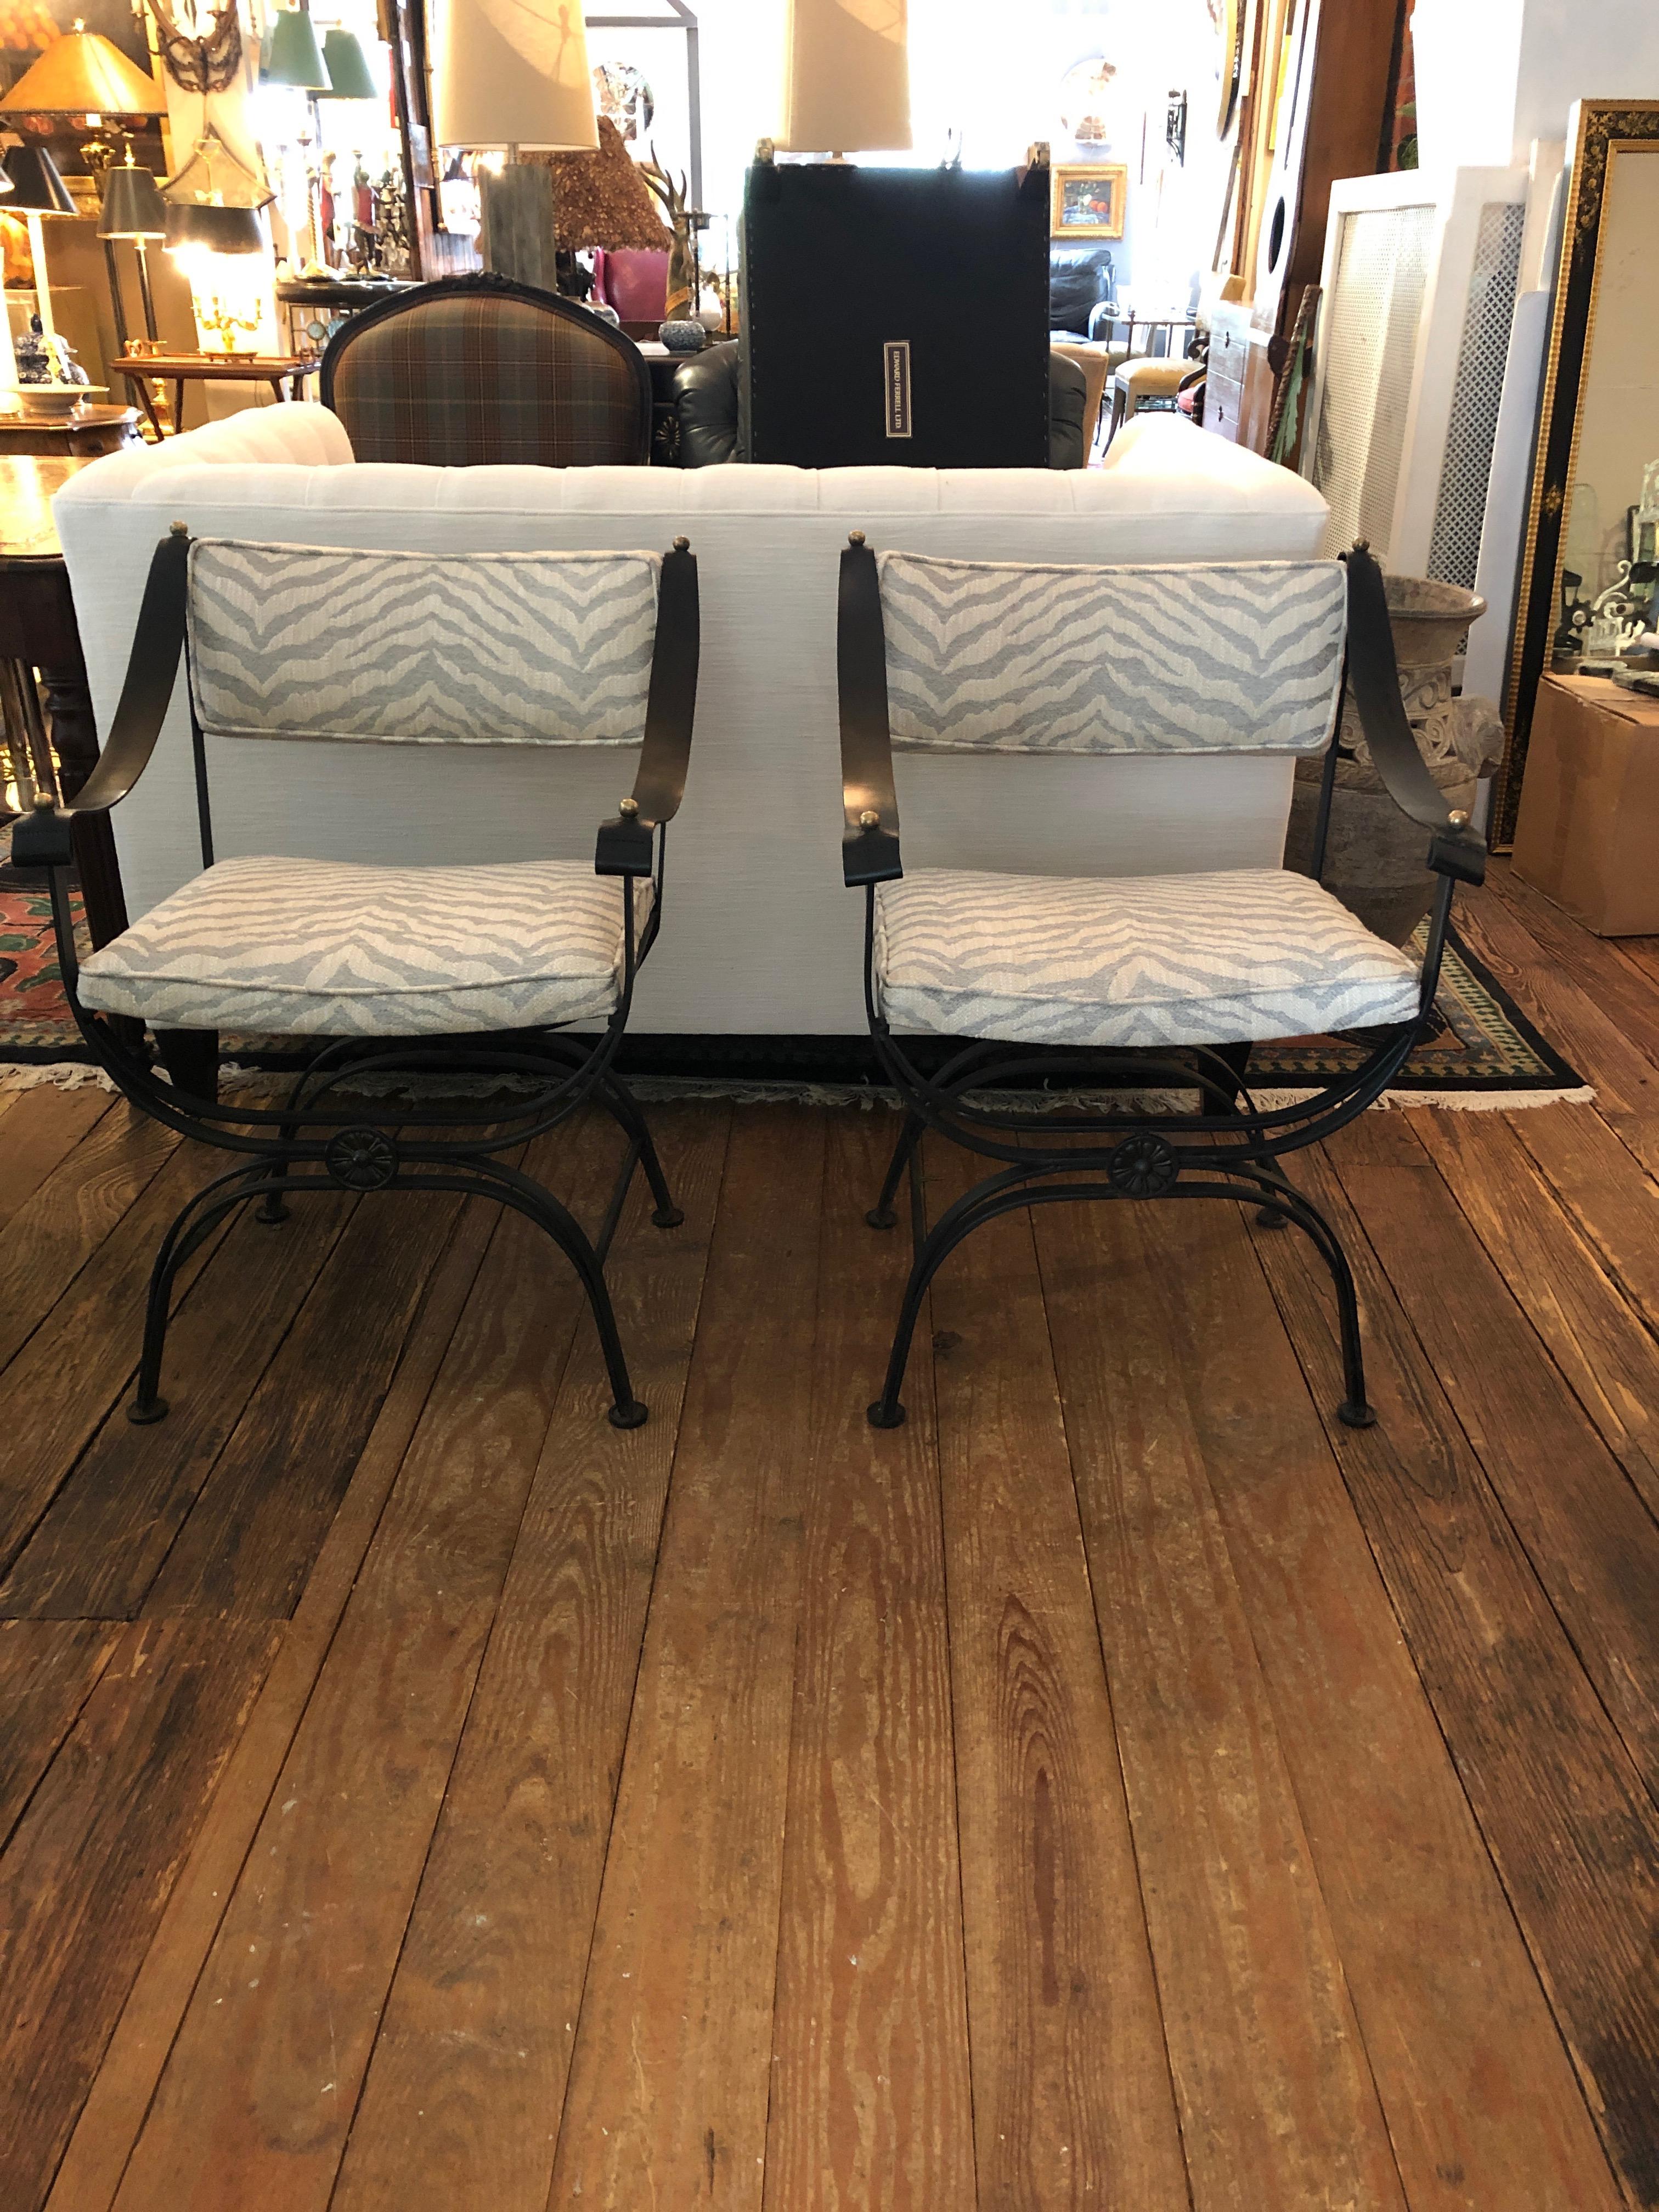 Fabulously stylish Campaign style vintage club chairs having airy yet heavy wrought iron frames and supple leather strap arms accented with brass knobs. New upholstery is neutral contemporary animal print. Comfy, substantial and the coolest chairs